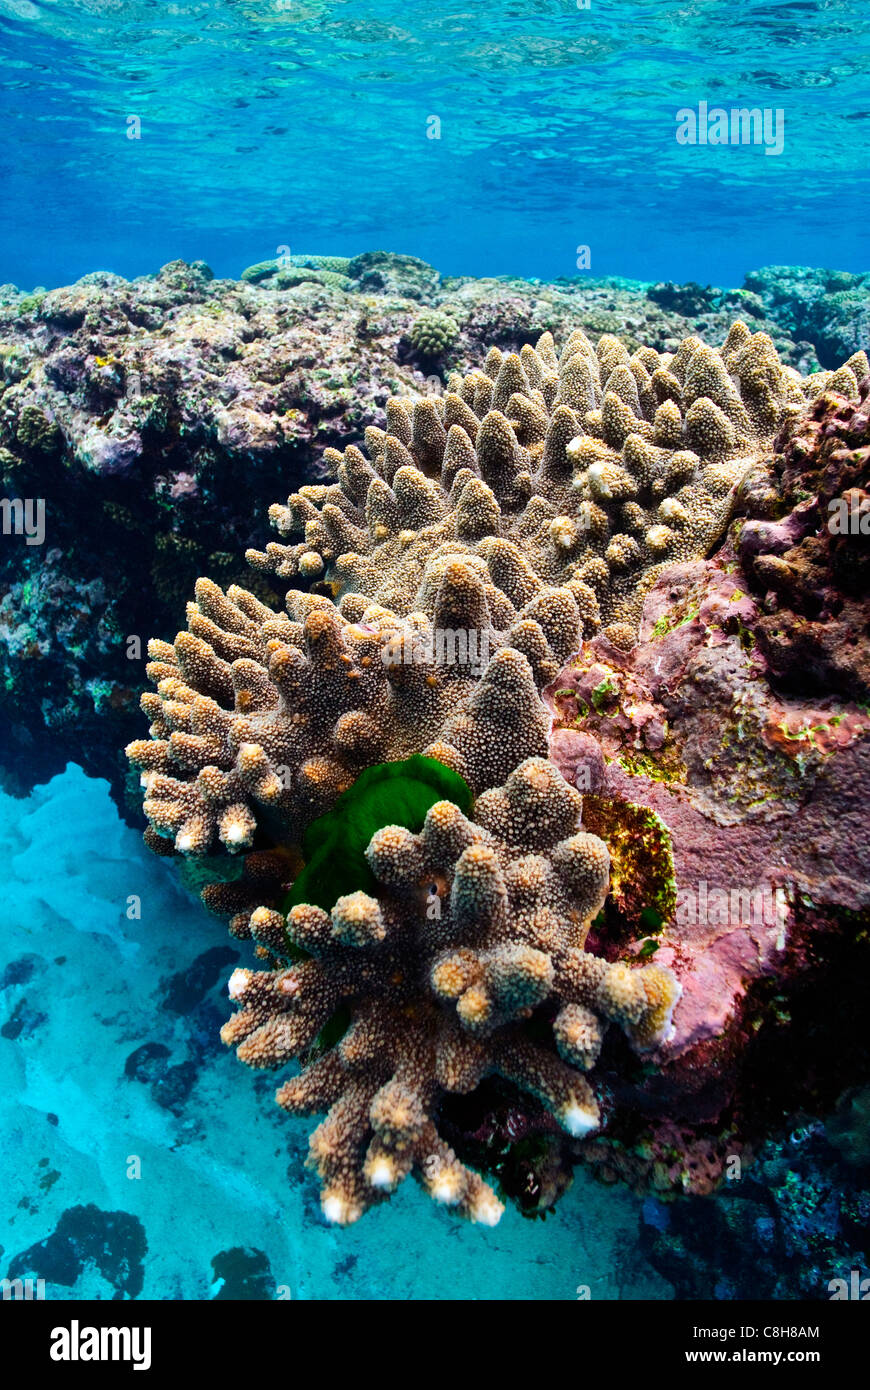 Warm, shallow seas over the jagged surface of a tropical coral reef. Stock Photo